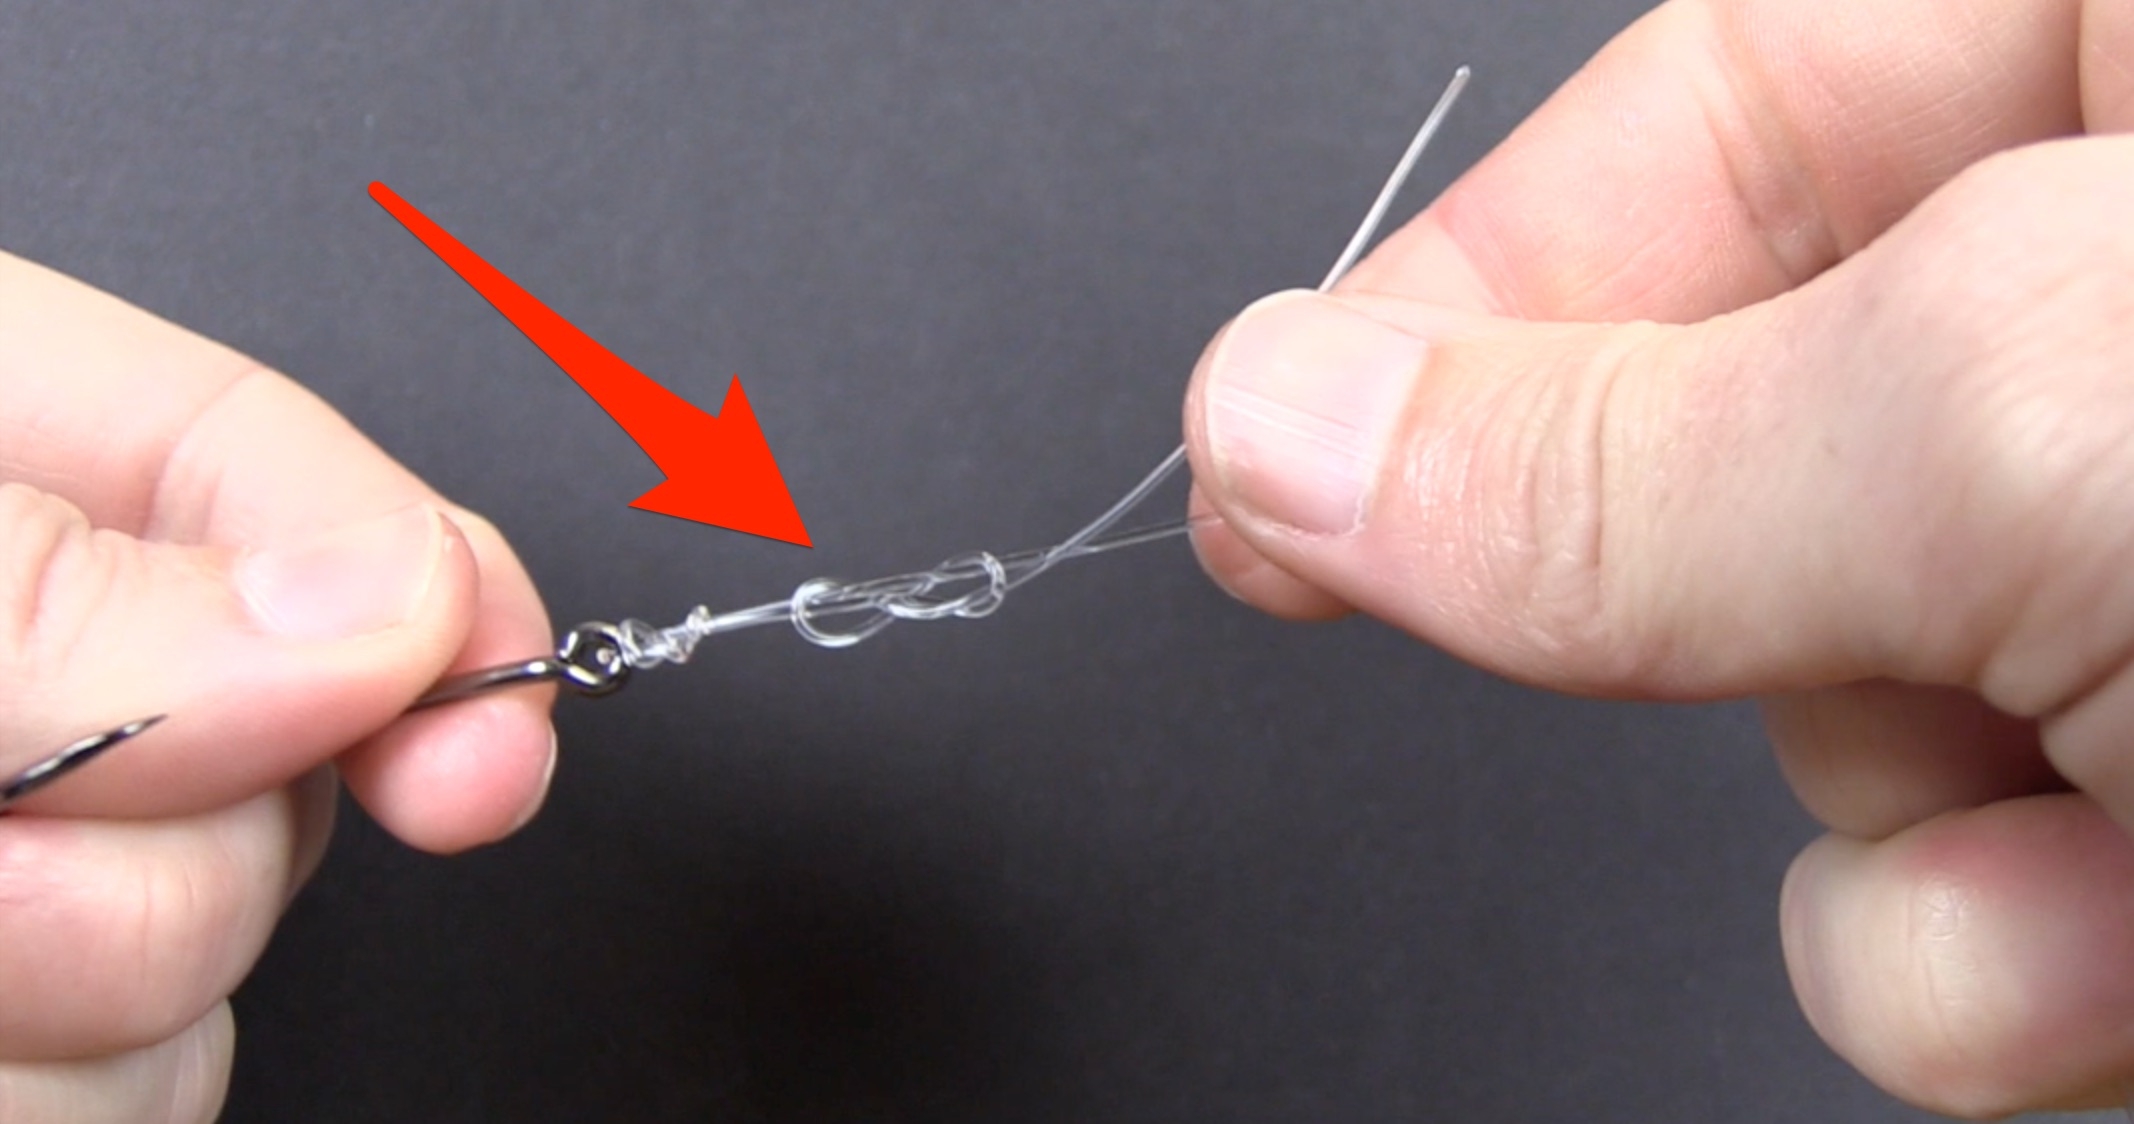 How To Tie The Double Figure 8 Loop Knot [REVIEW]